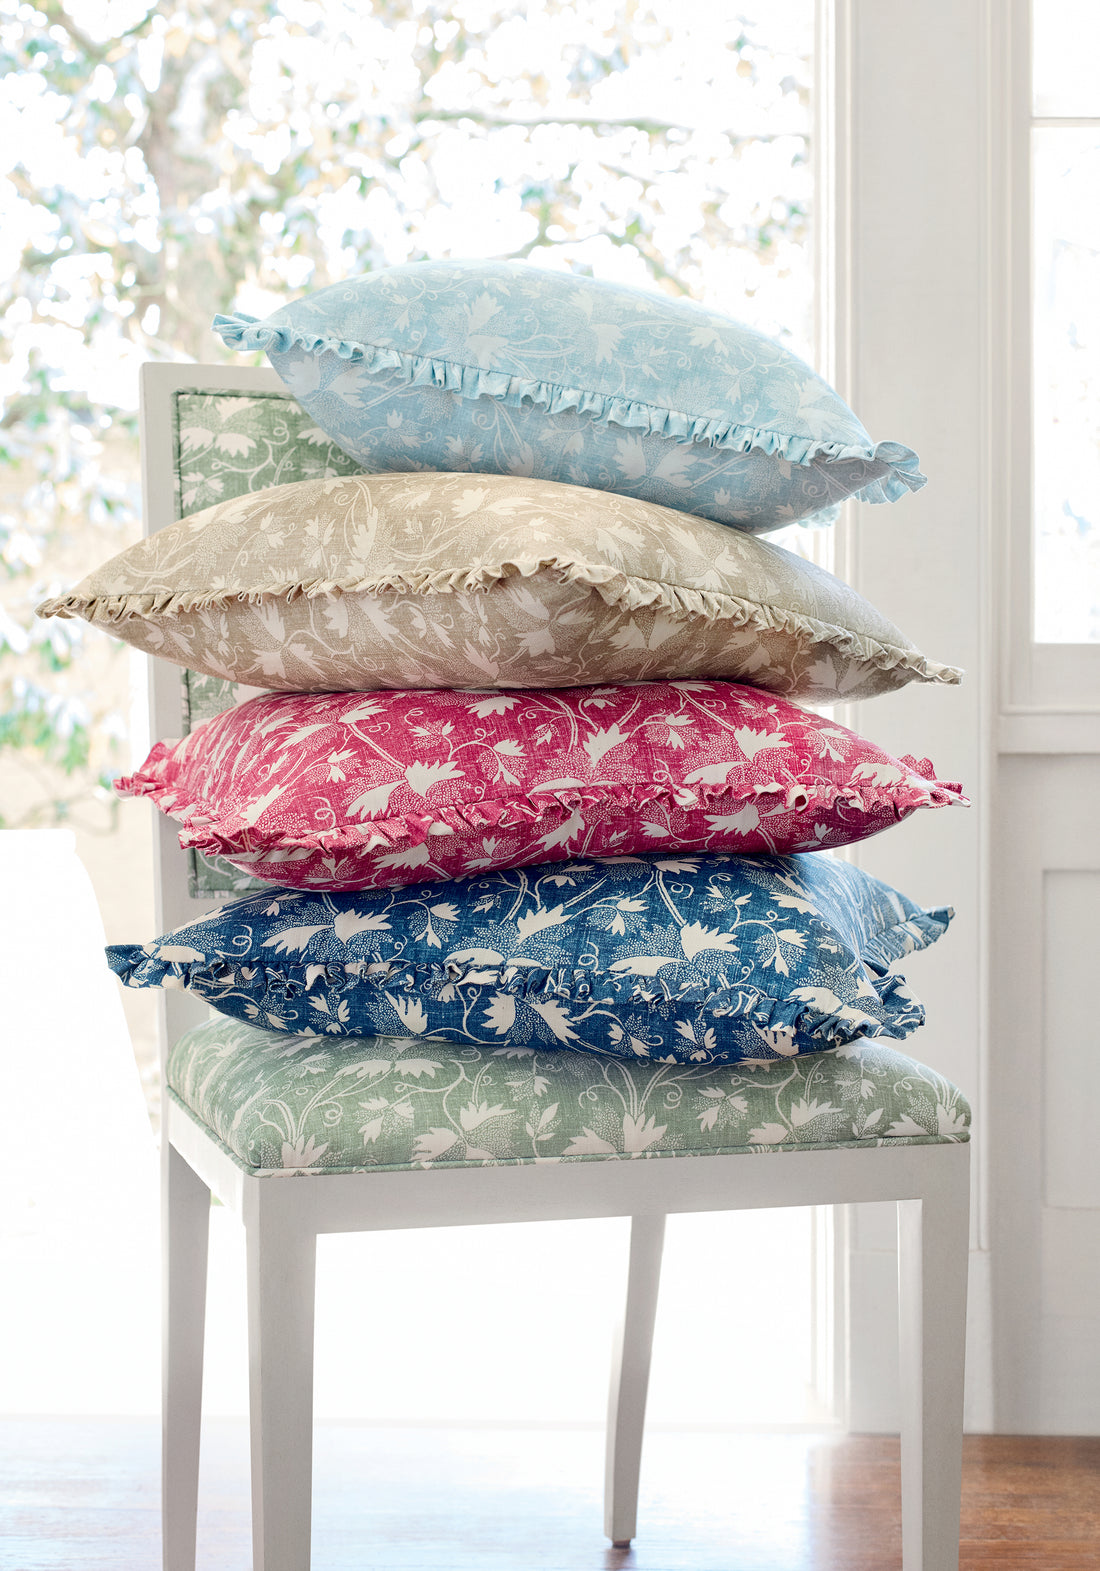 Pillow featuring Chester fabric in seaglass color - pattern number F936432 - by Thibaut in the Indienne collection